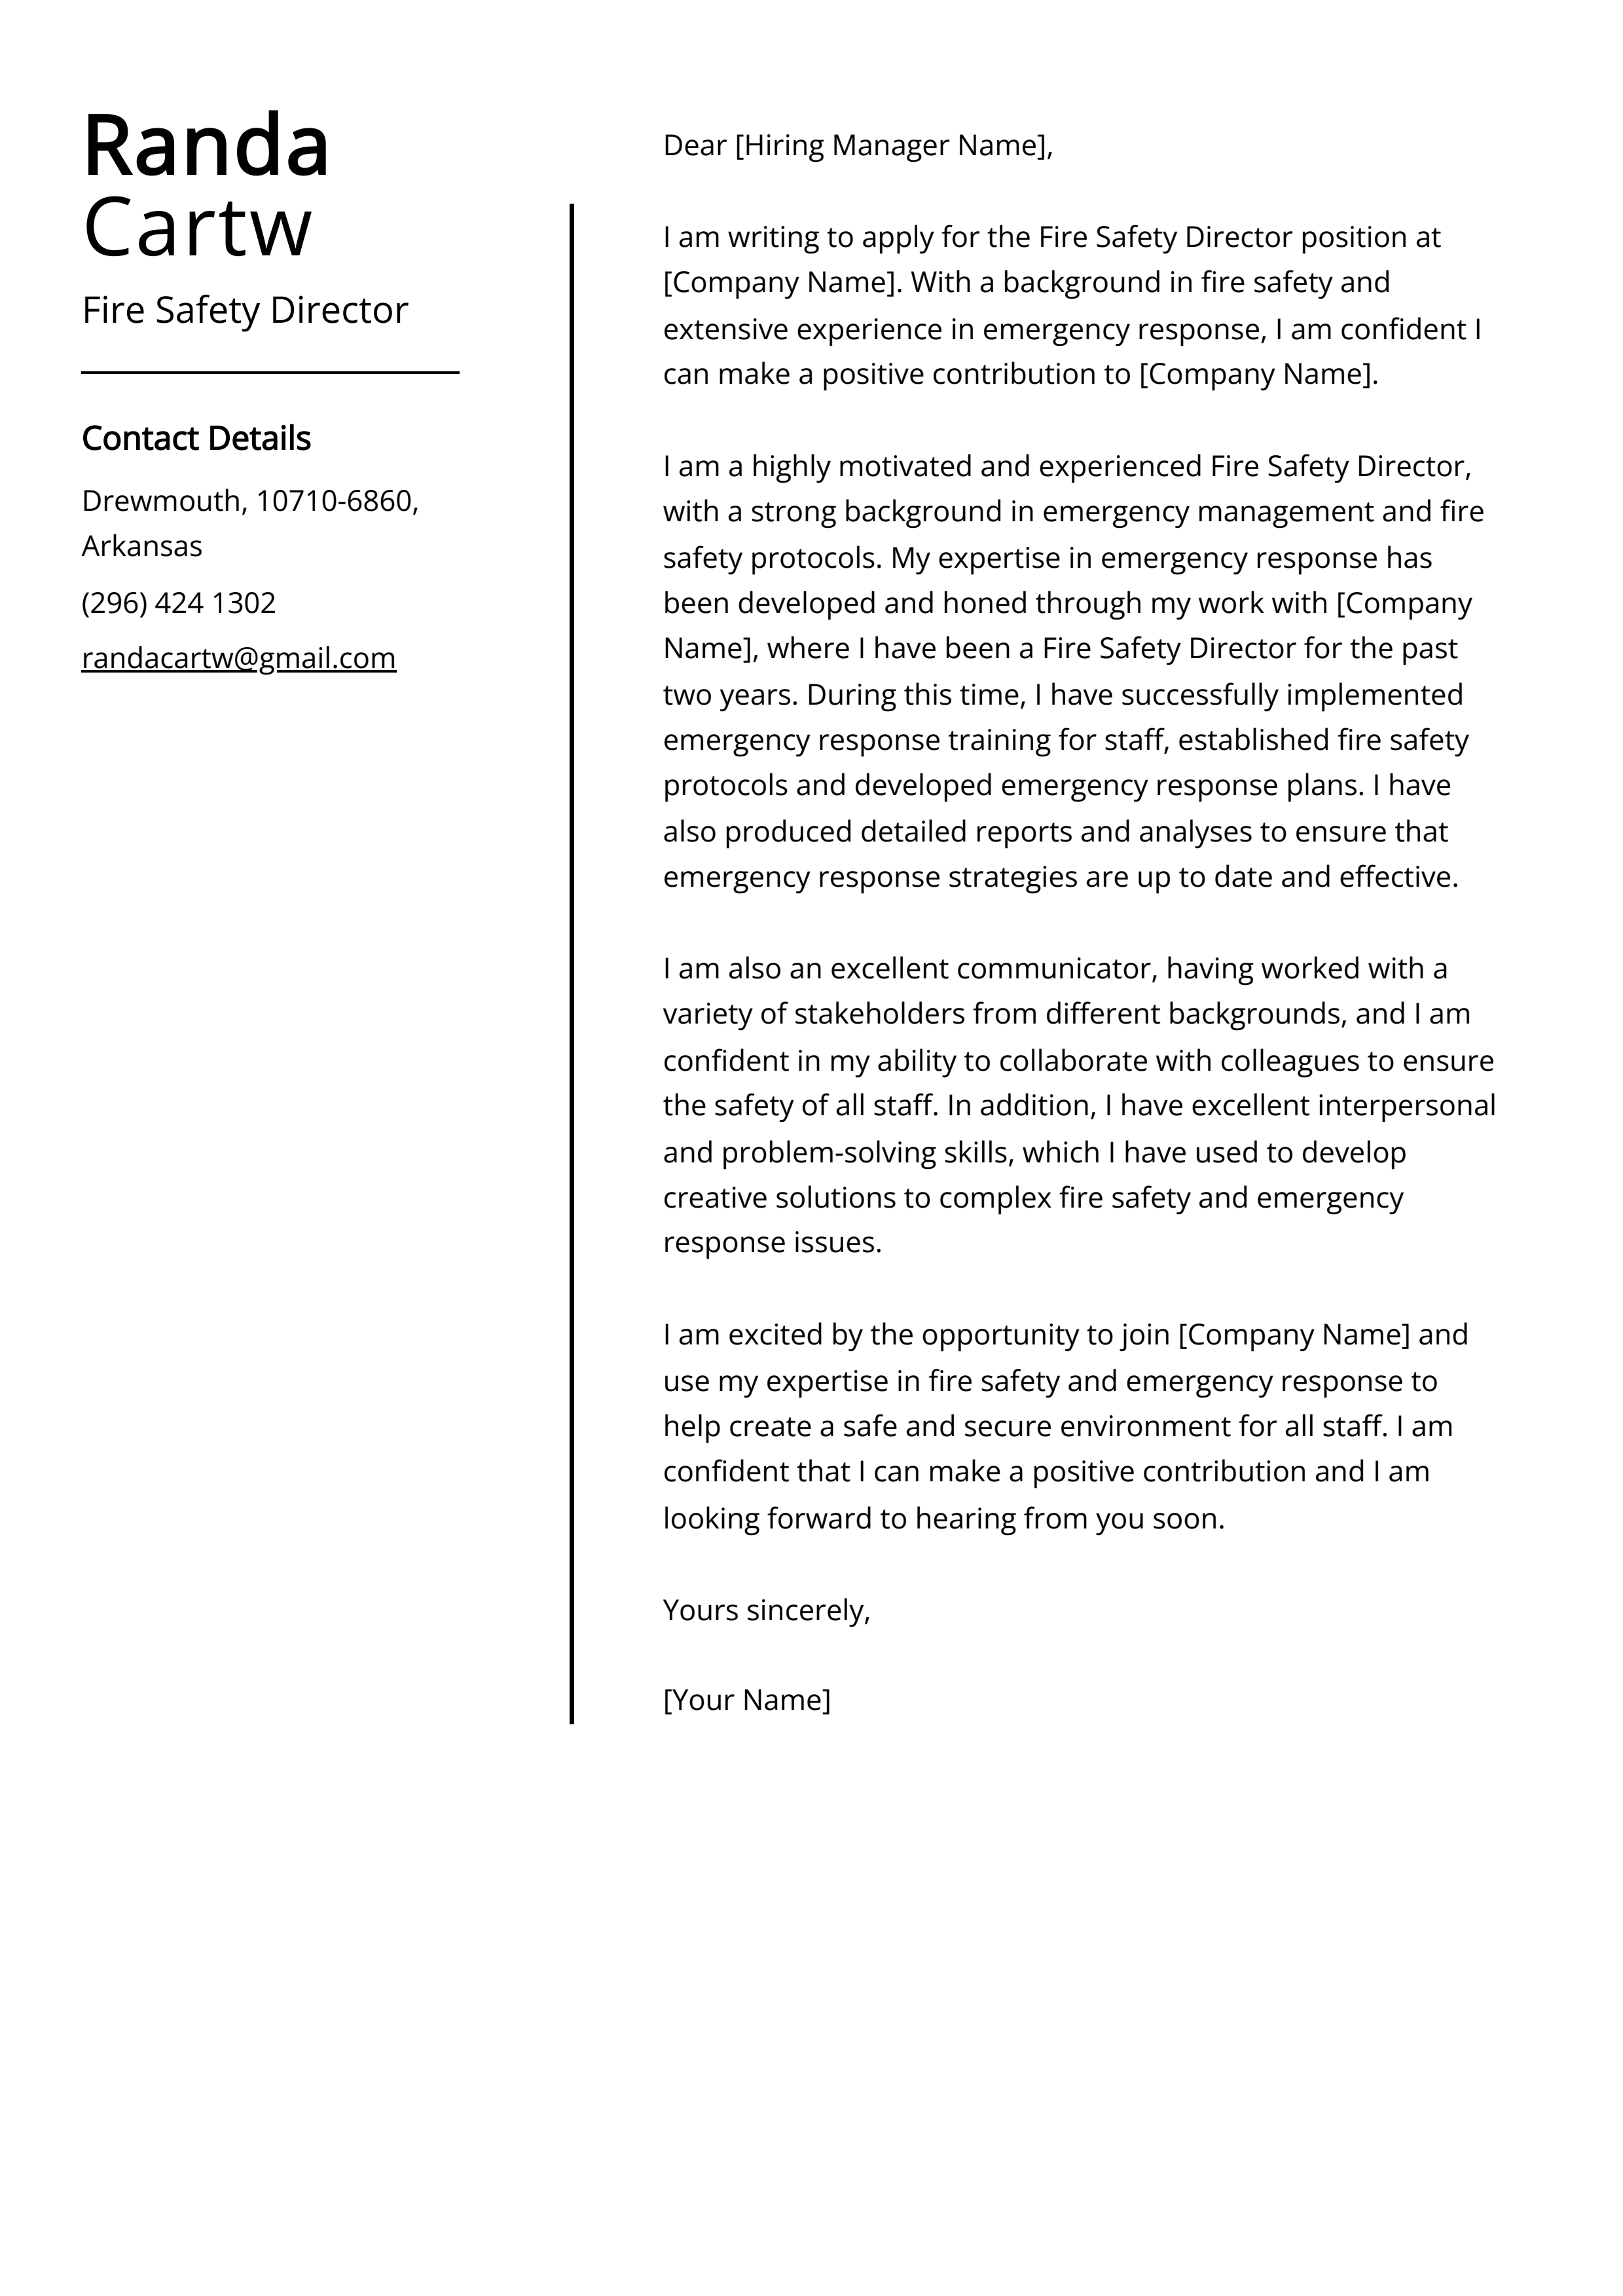 Fire Safety Director Cover Letter Example